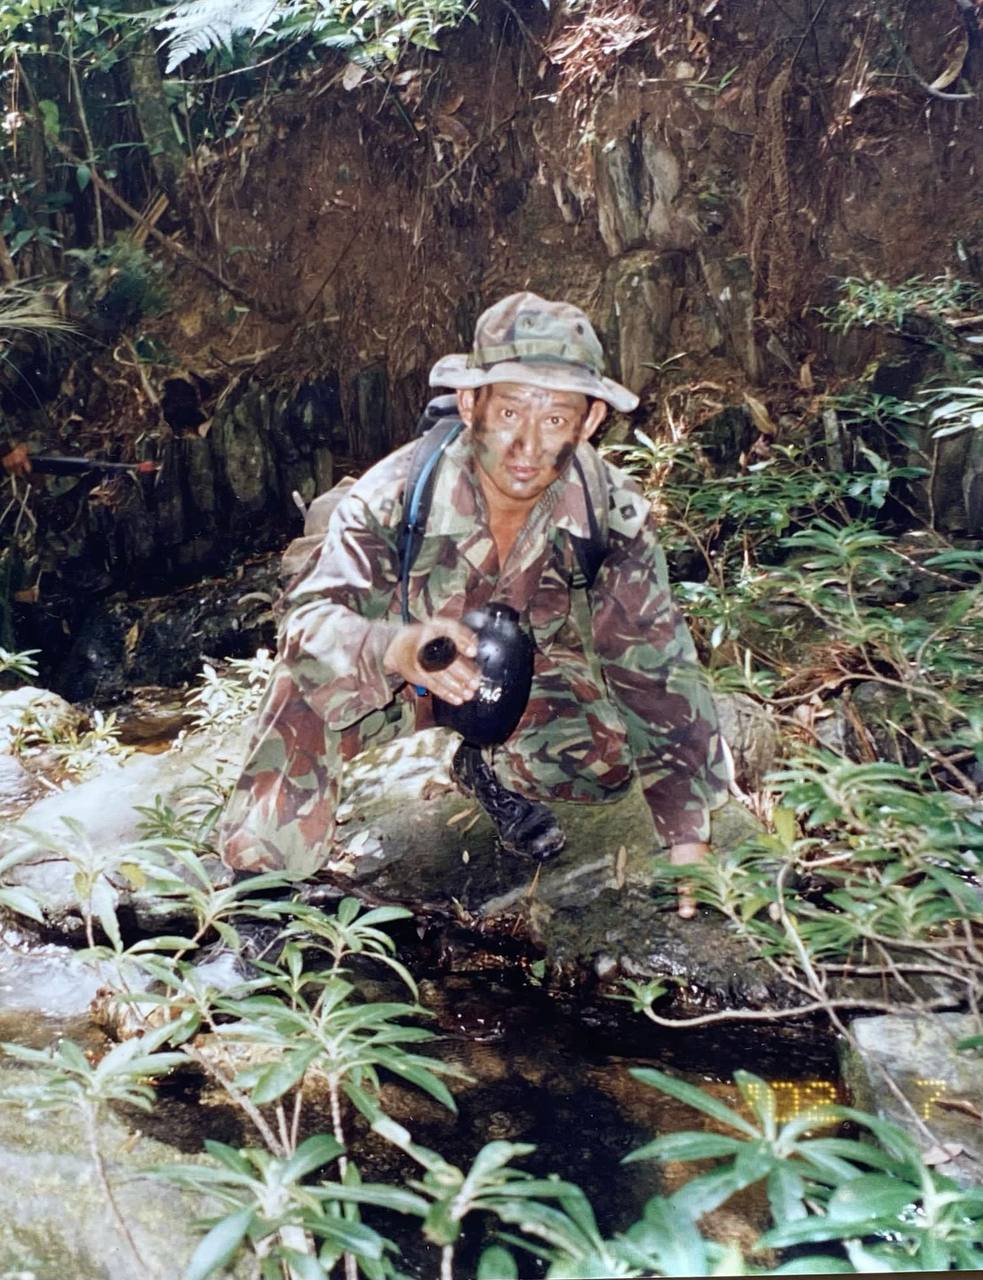 A soldier dressed in camouflage, holding a water canteen, in the middle of the jungle.